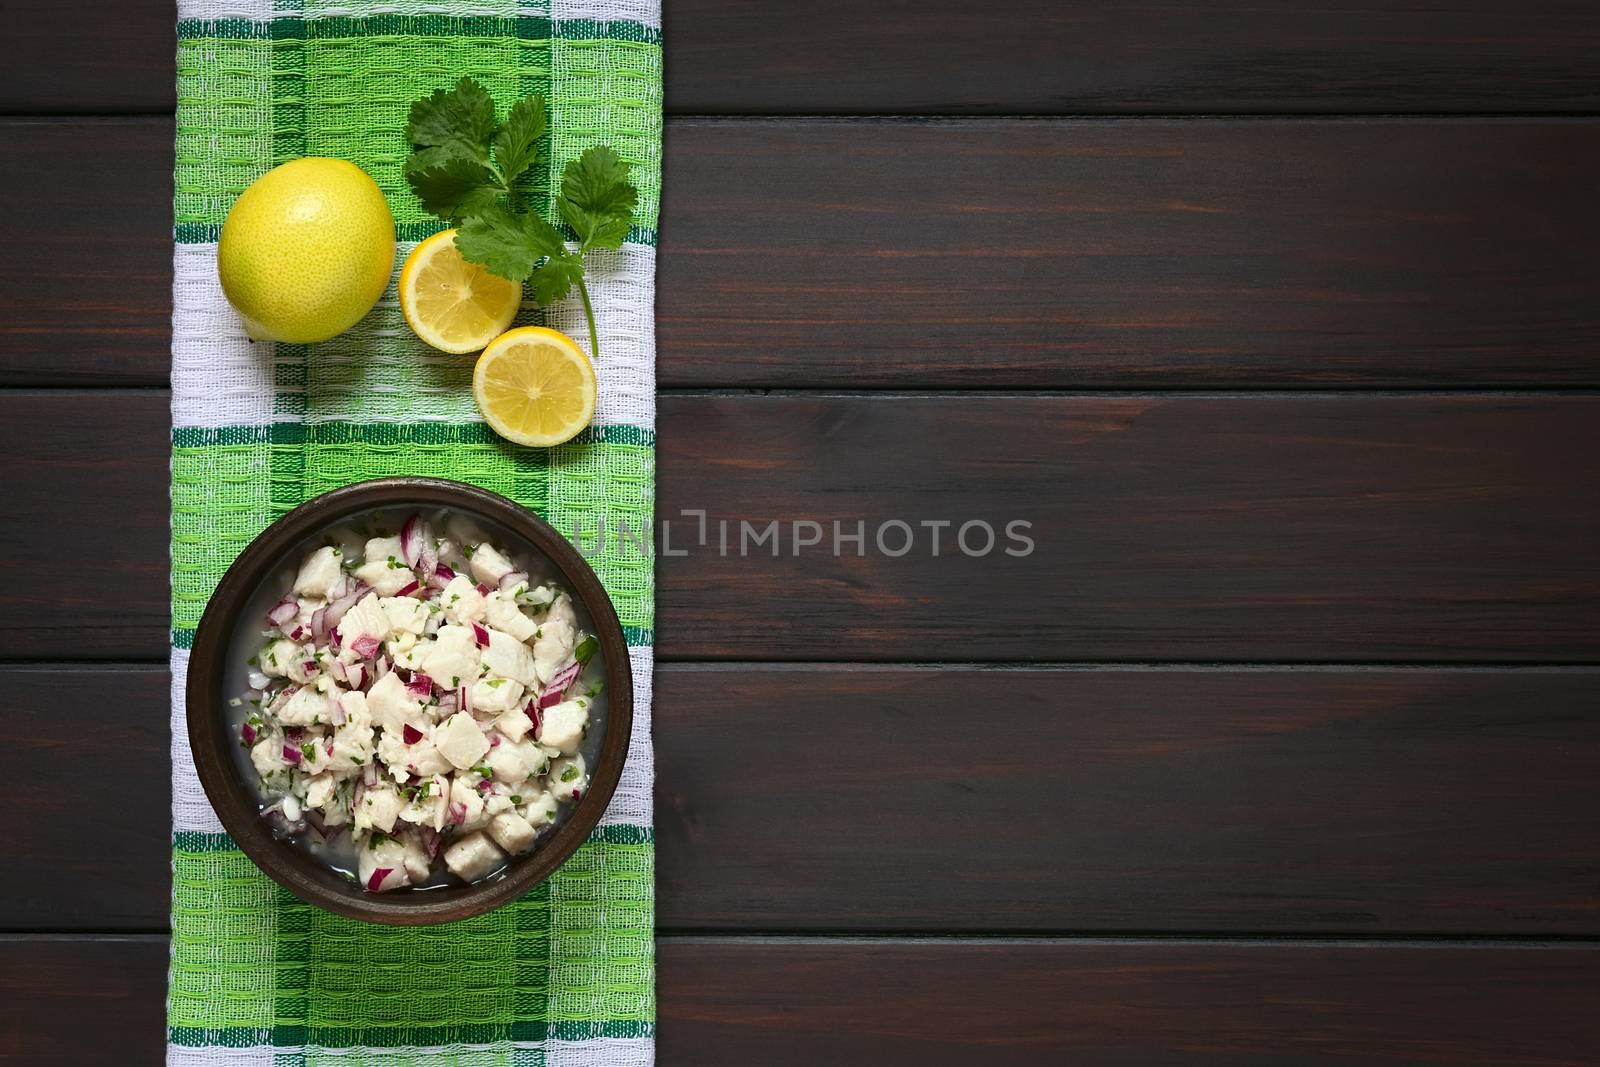 Chilean Ceviche made of Southern Ray's bream fish (lat. Brama Australis, Spanish Reineta), onion, garlic and cilantro marinated in lemon juice. Photographed overhead on dark wood with natural light.